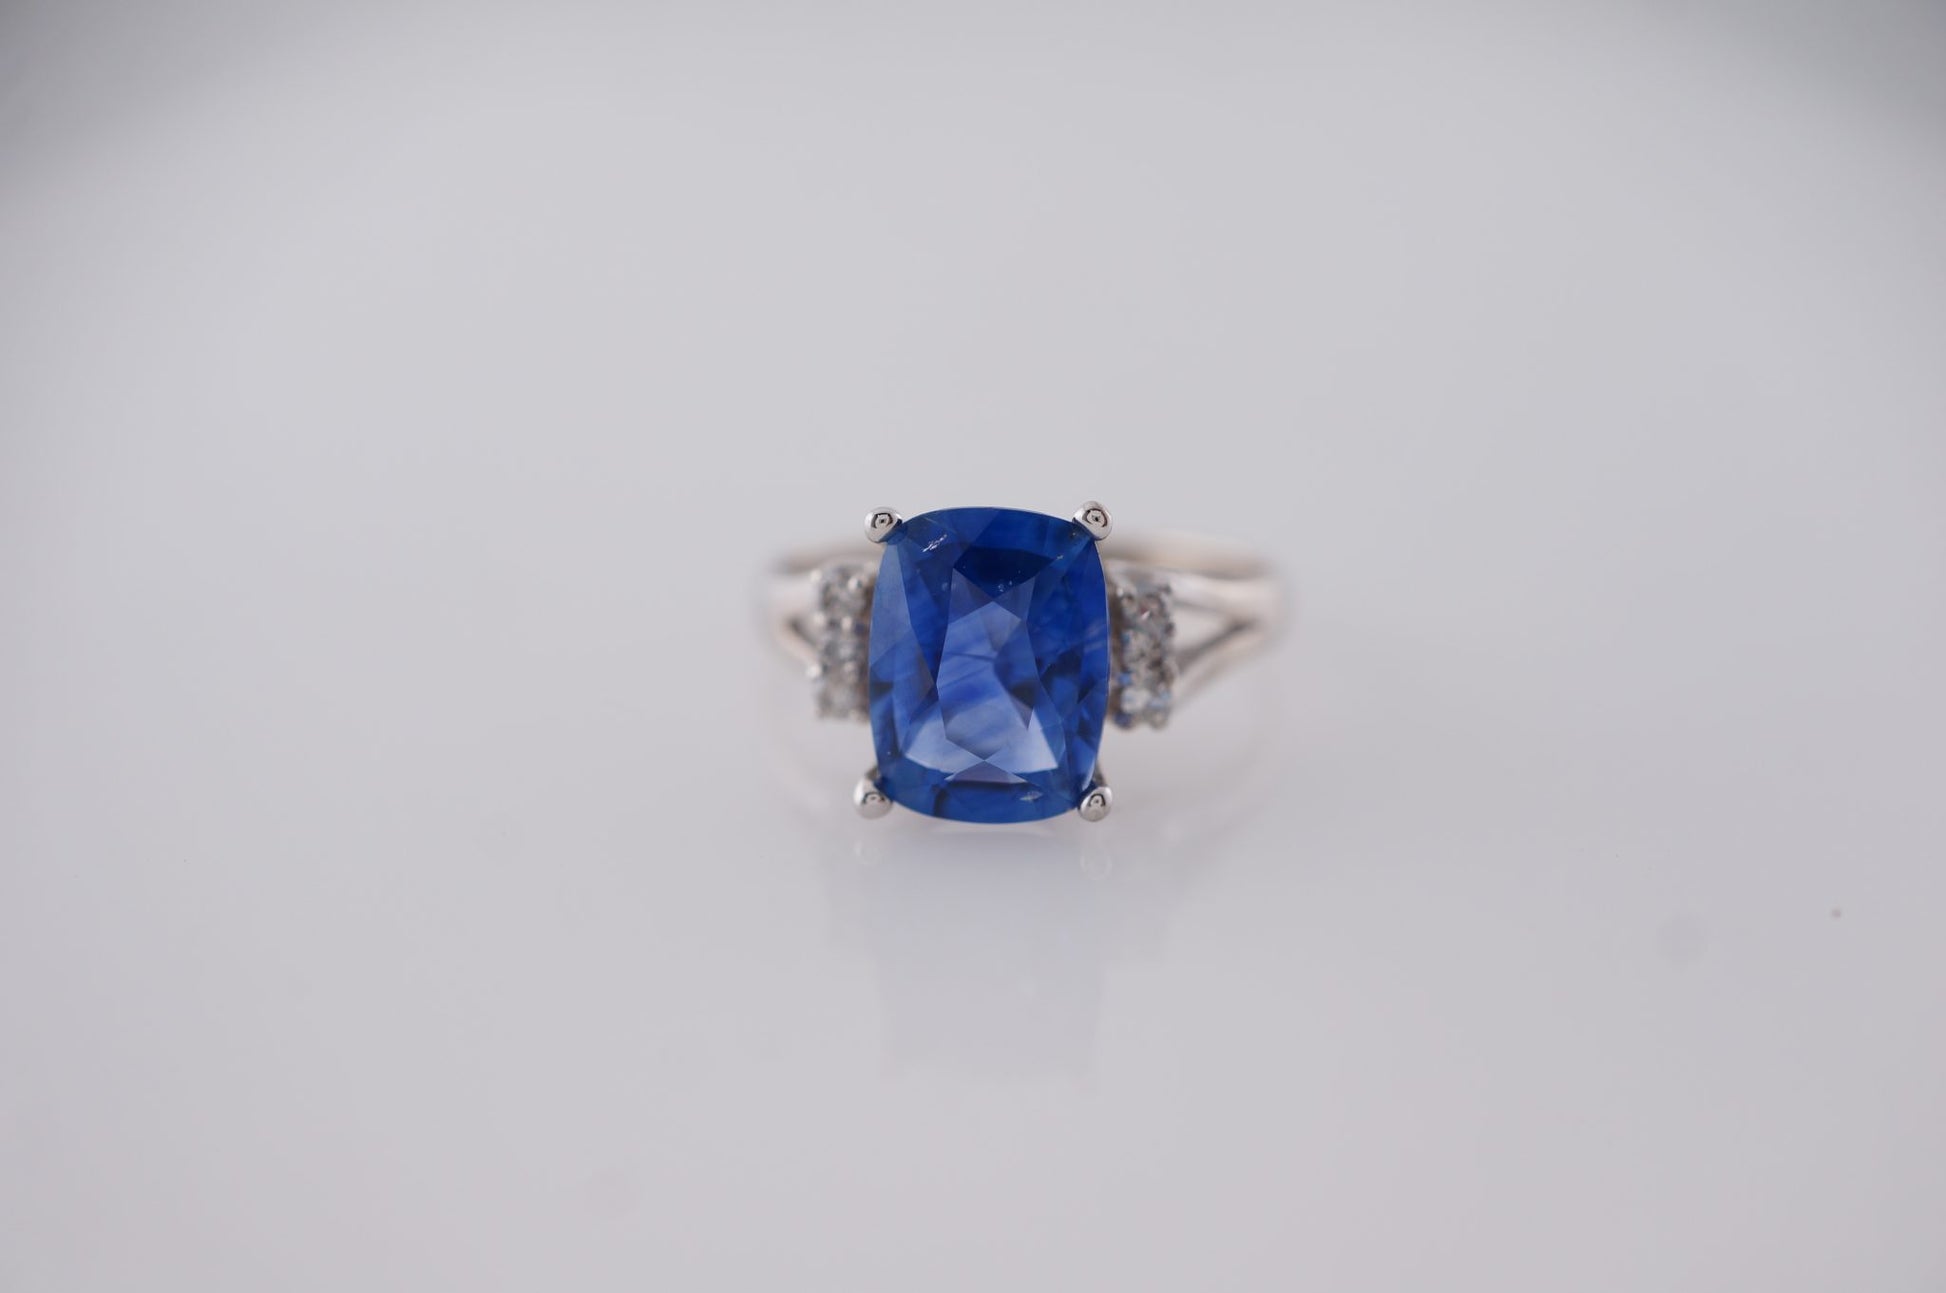 Vintage Engagement Ring Mid-Century 3.32 Oval Cut Sapphire in 14k White Gold